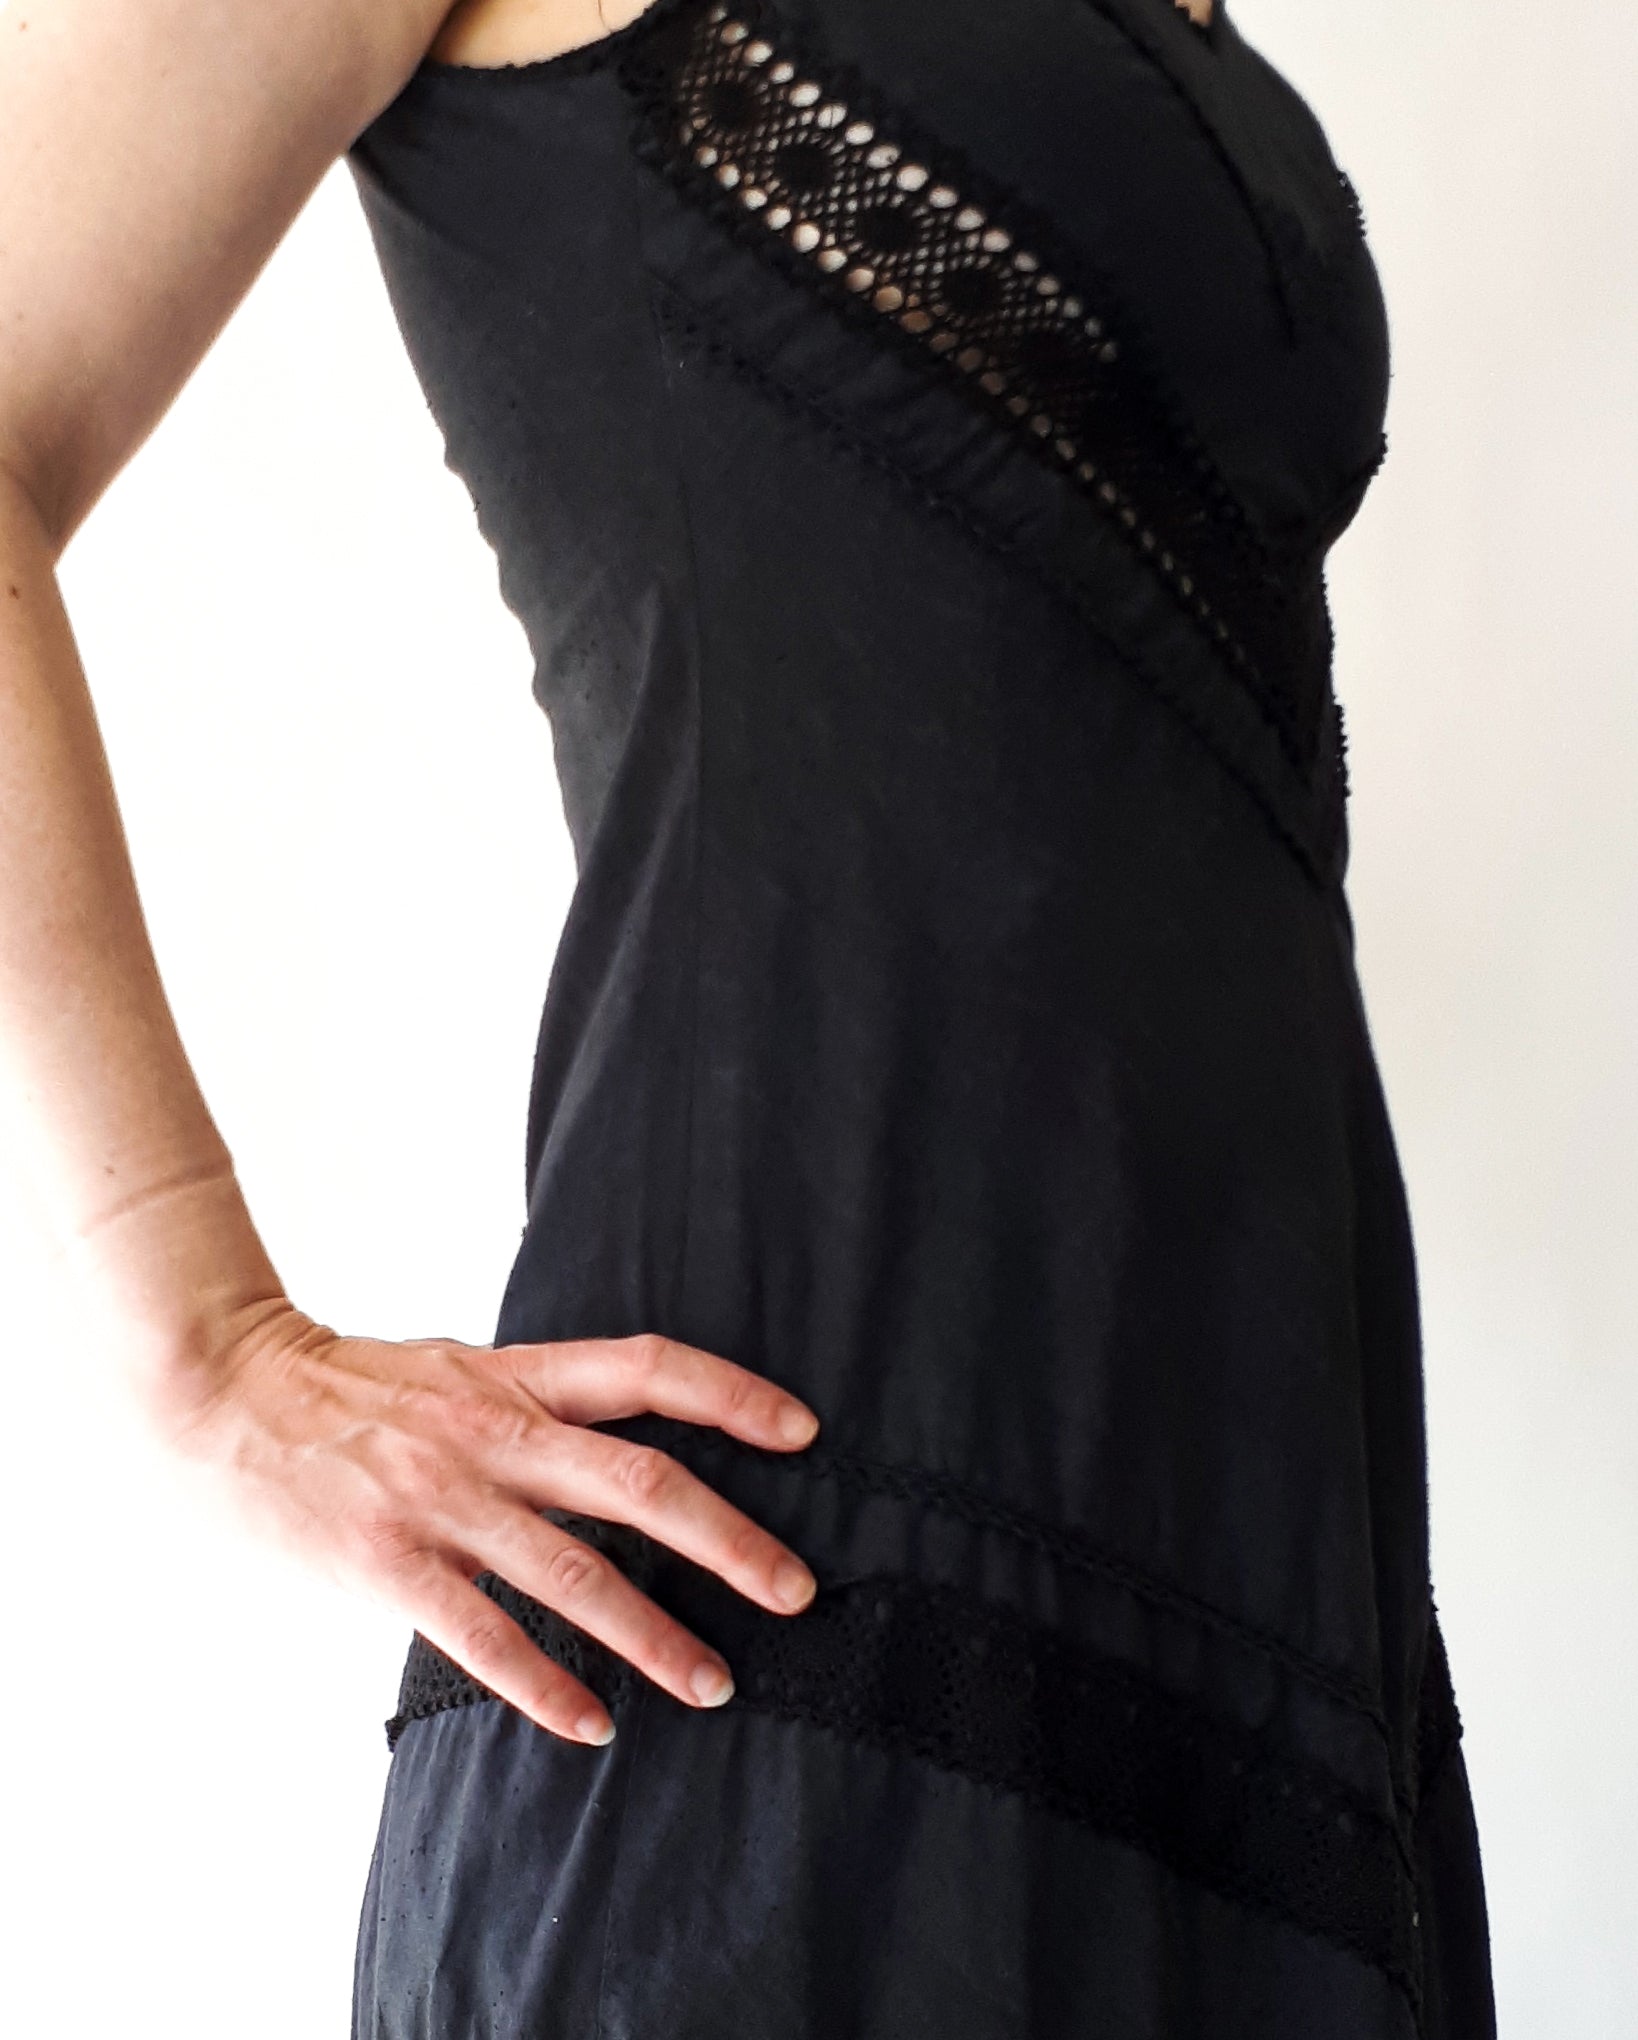 Vintage 70s Black Dress Cotton With Crocheted Insets and Tied Shoulder Straps